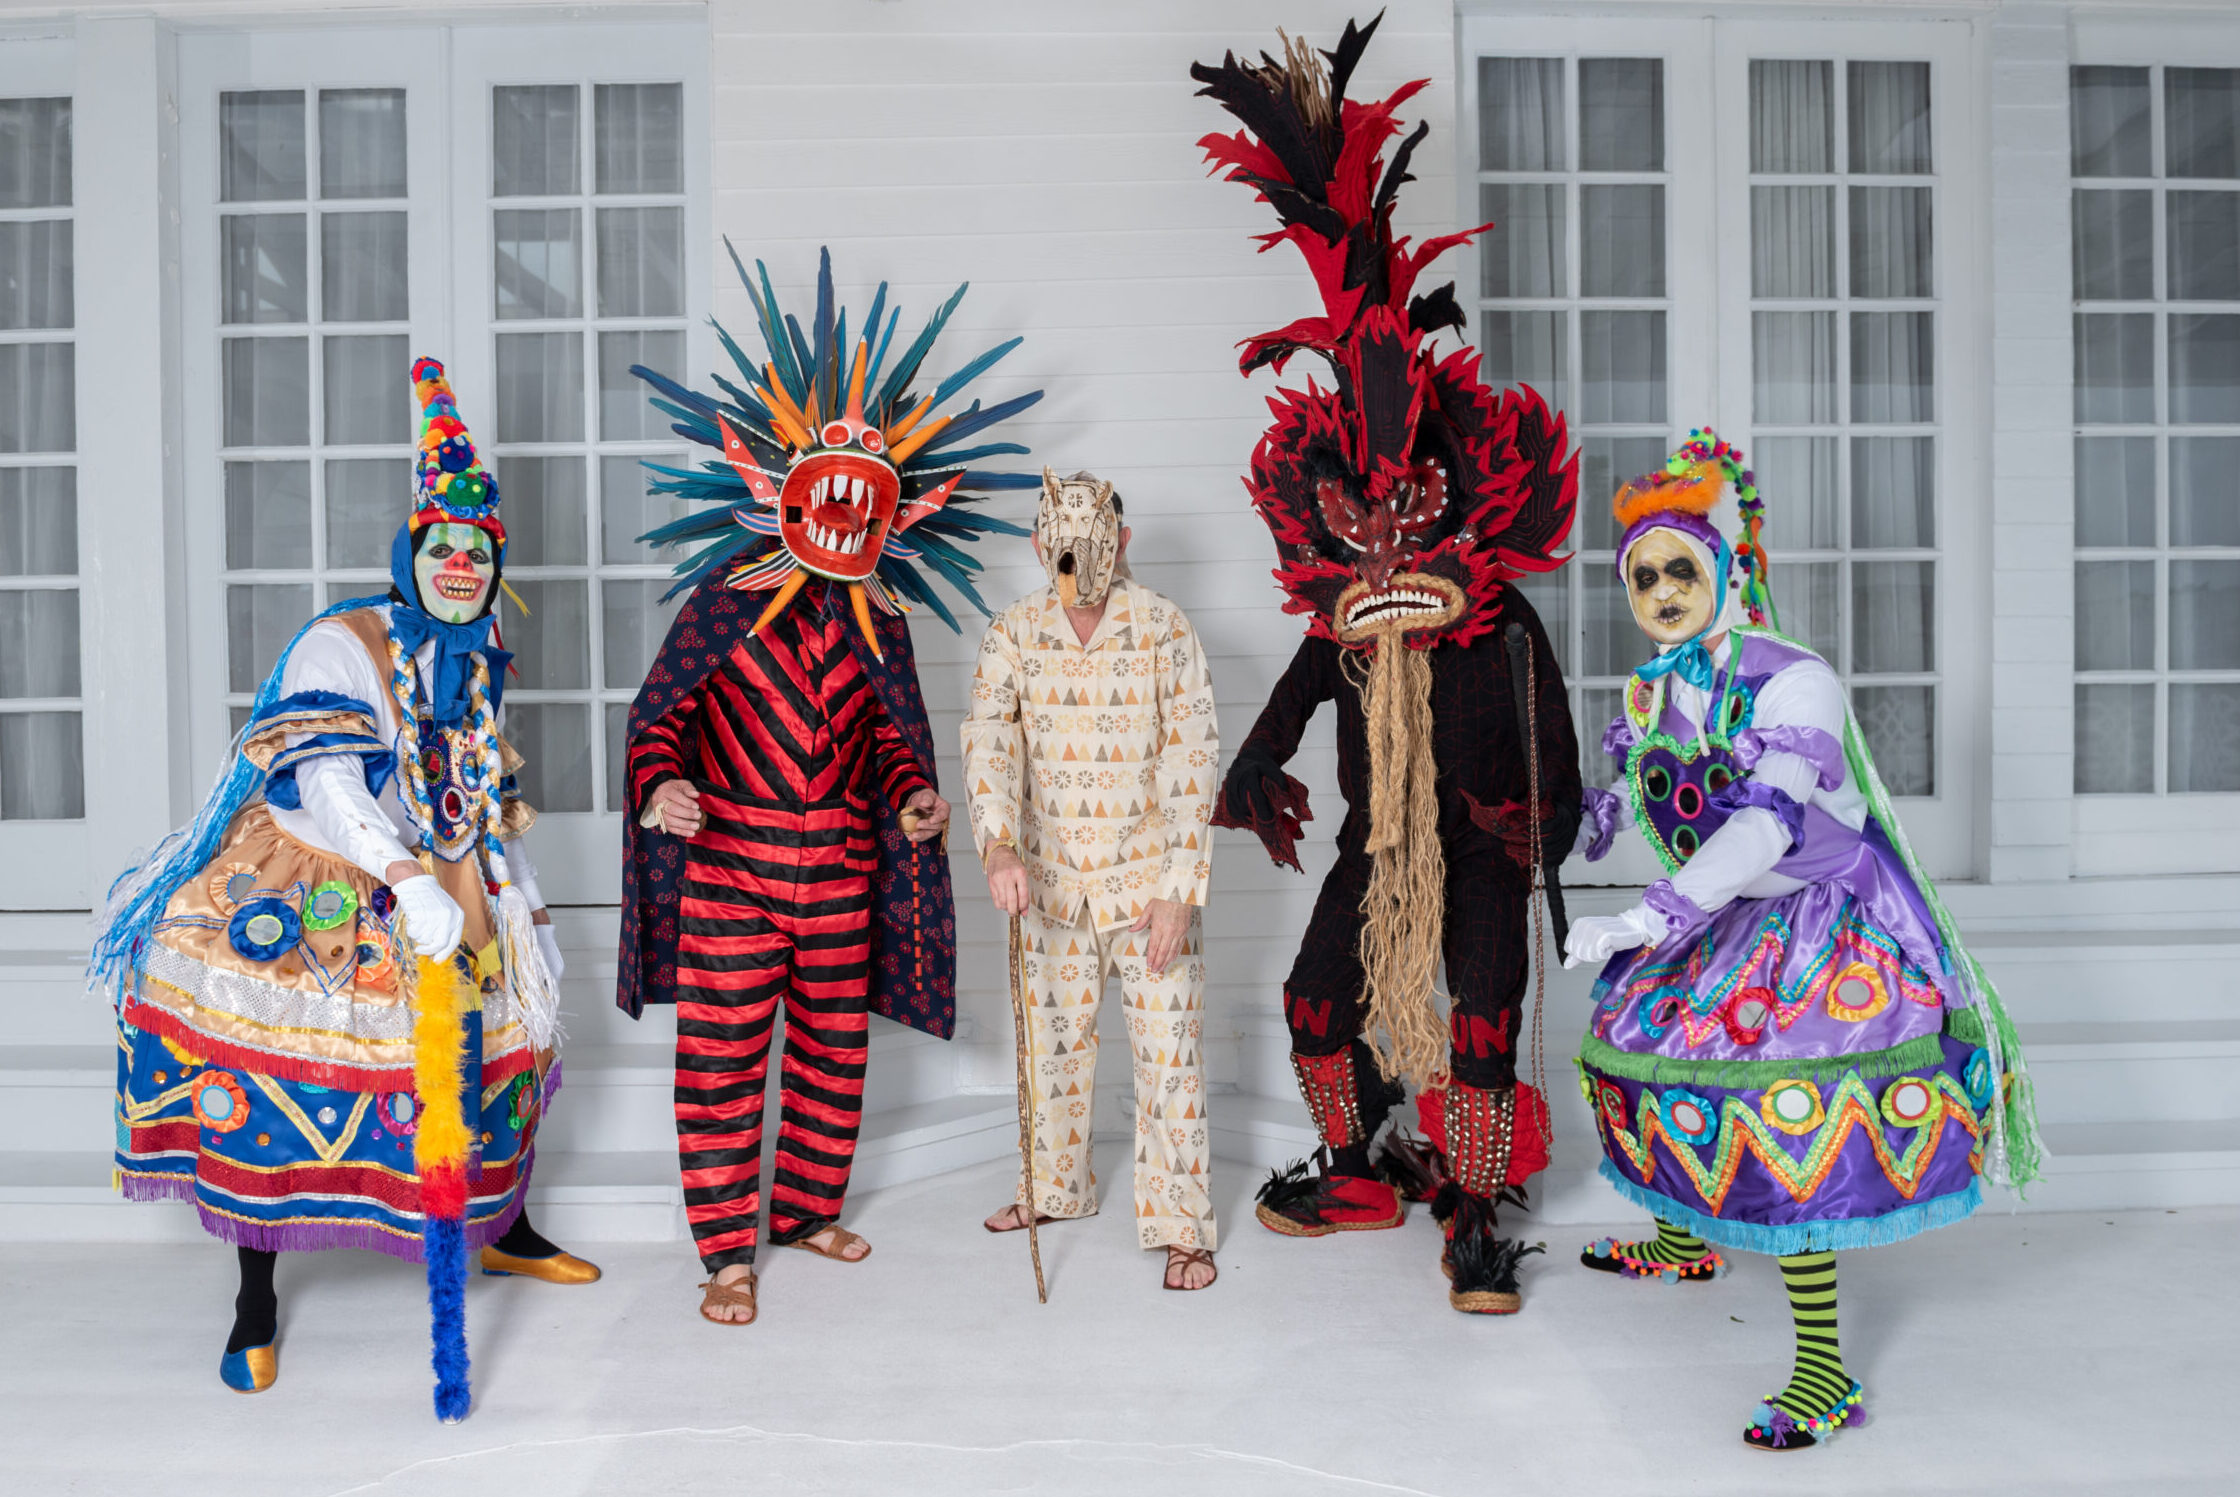 Five people in different costumes pose for a photo. Each costume is different and includes elaborate headpieces, masks, and outfits.